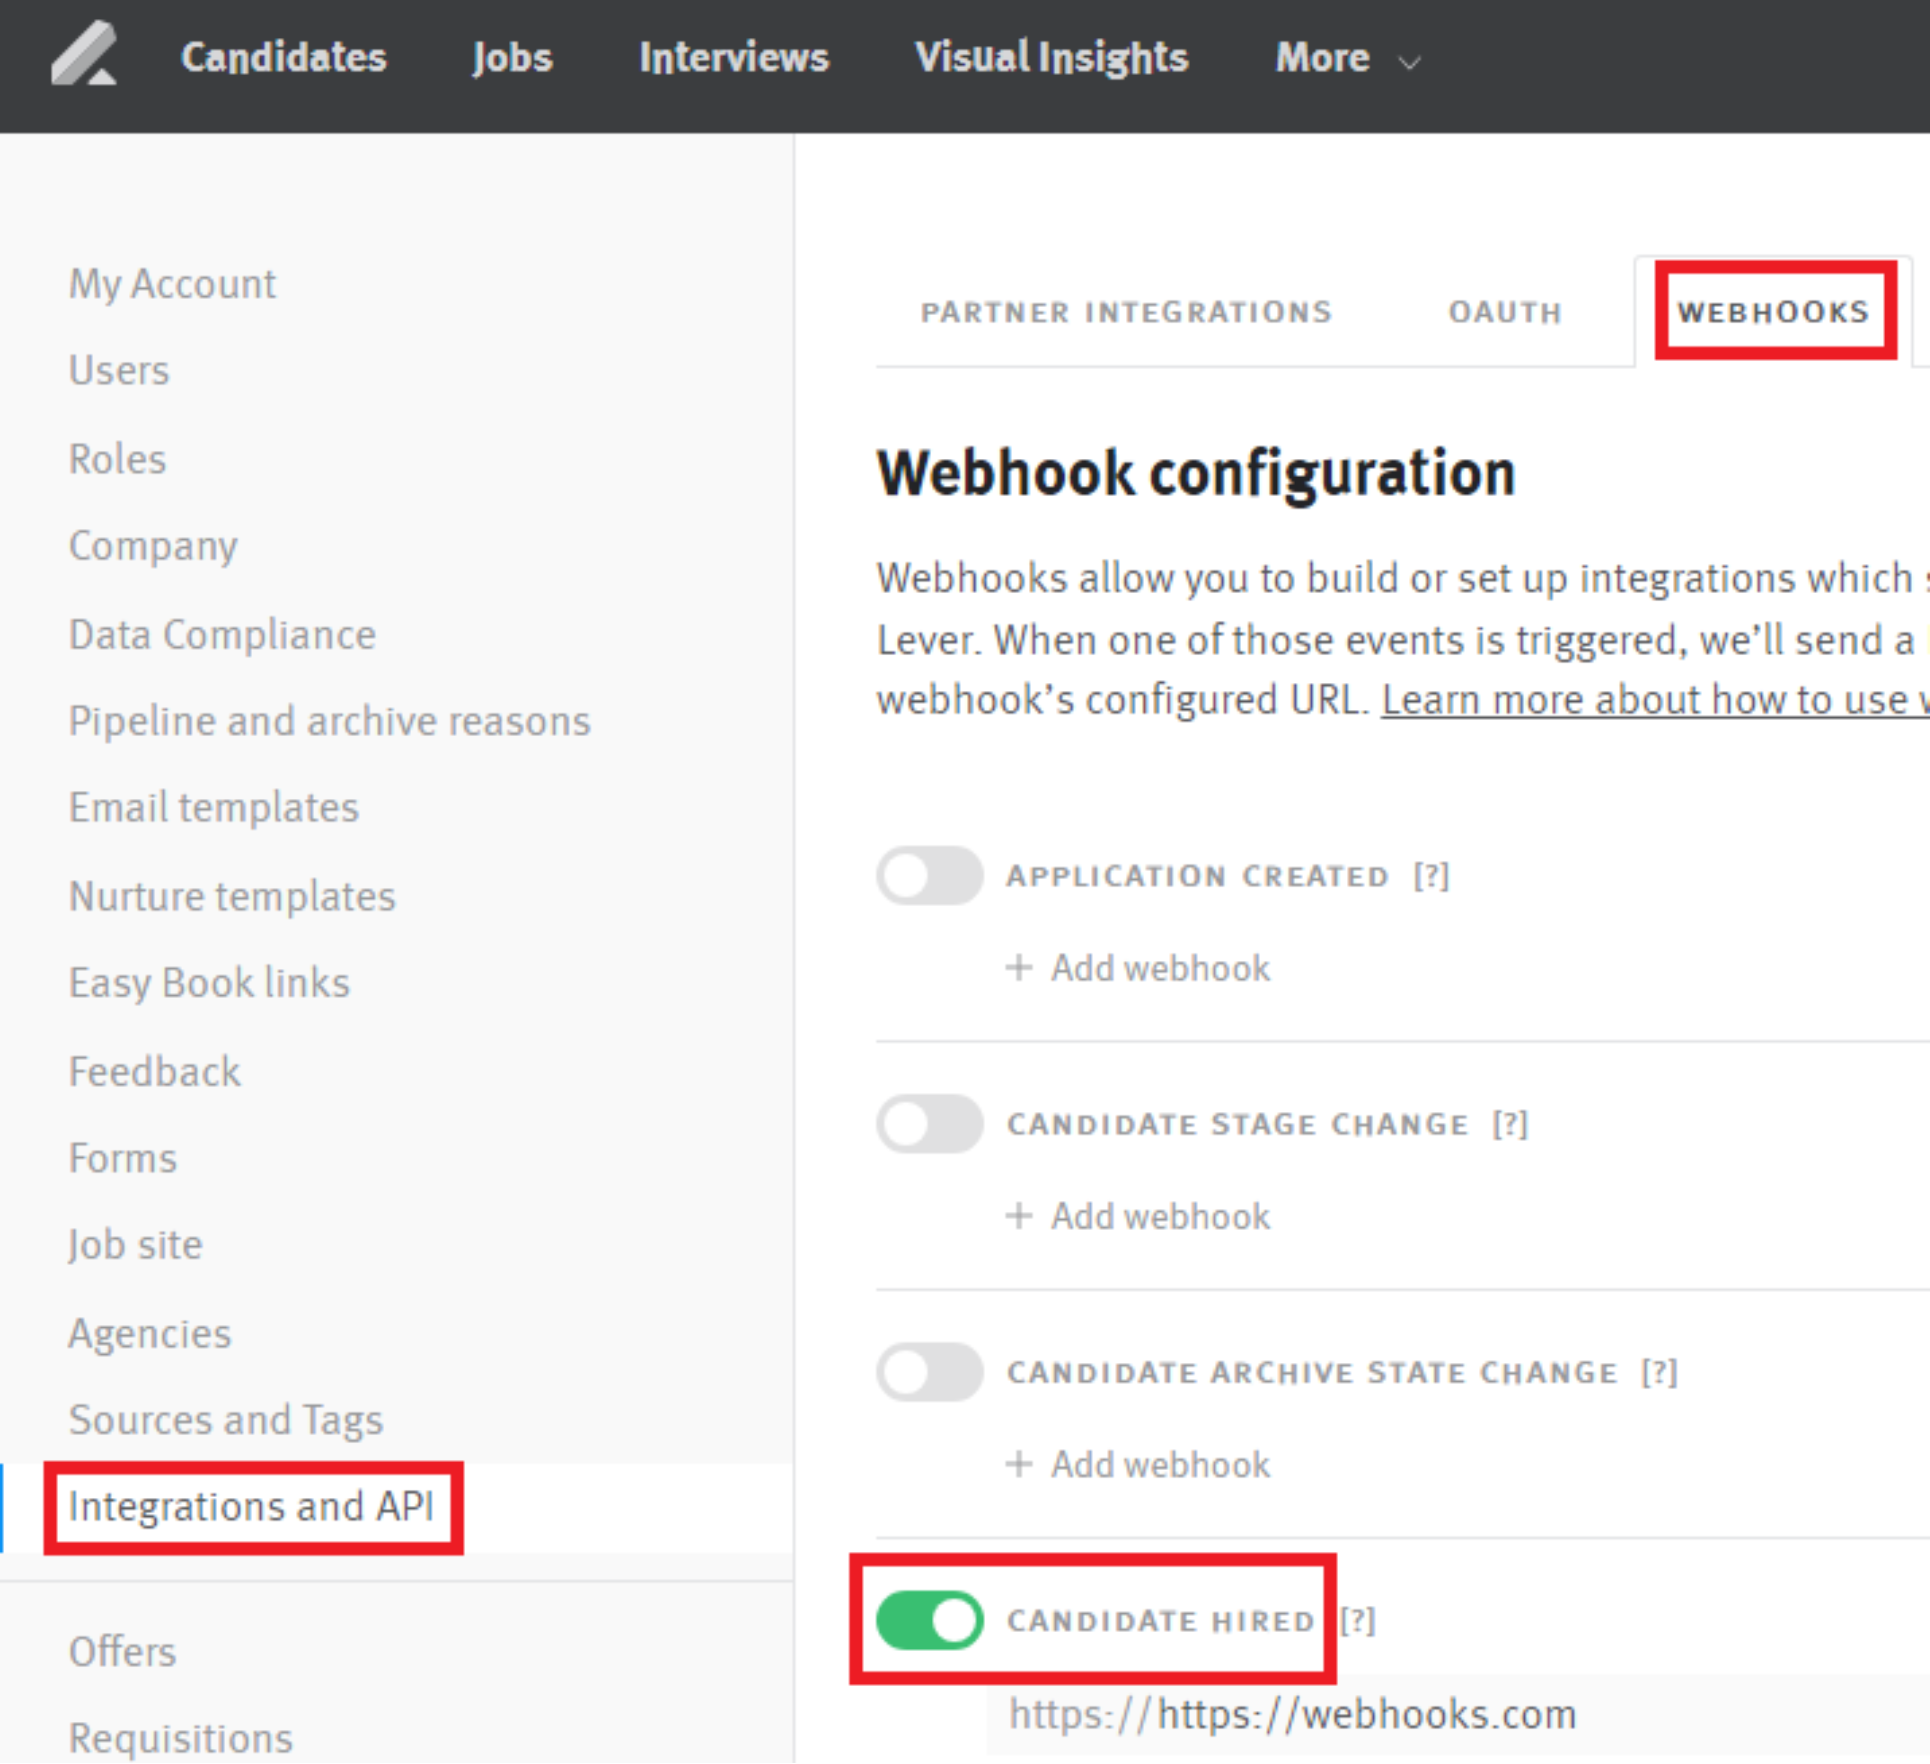 Webhooks page in Lever settings, Candidate Hired toggle outlined